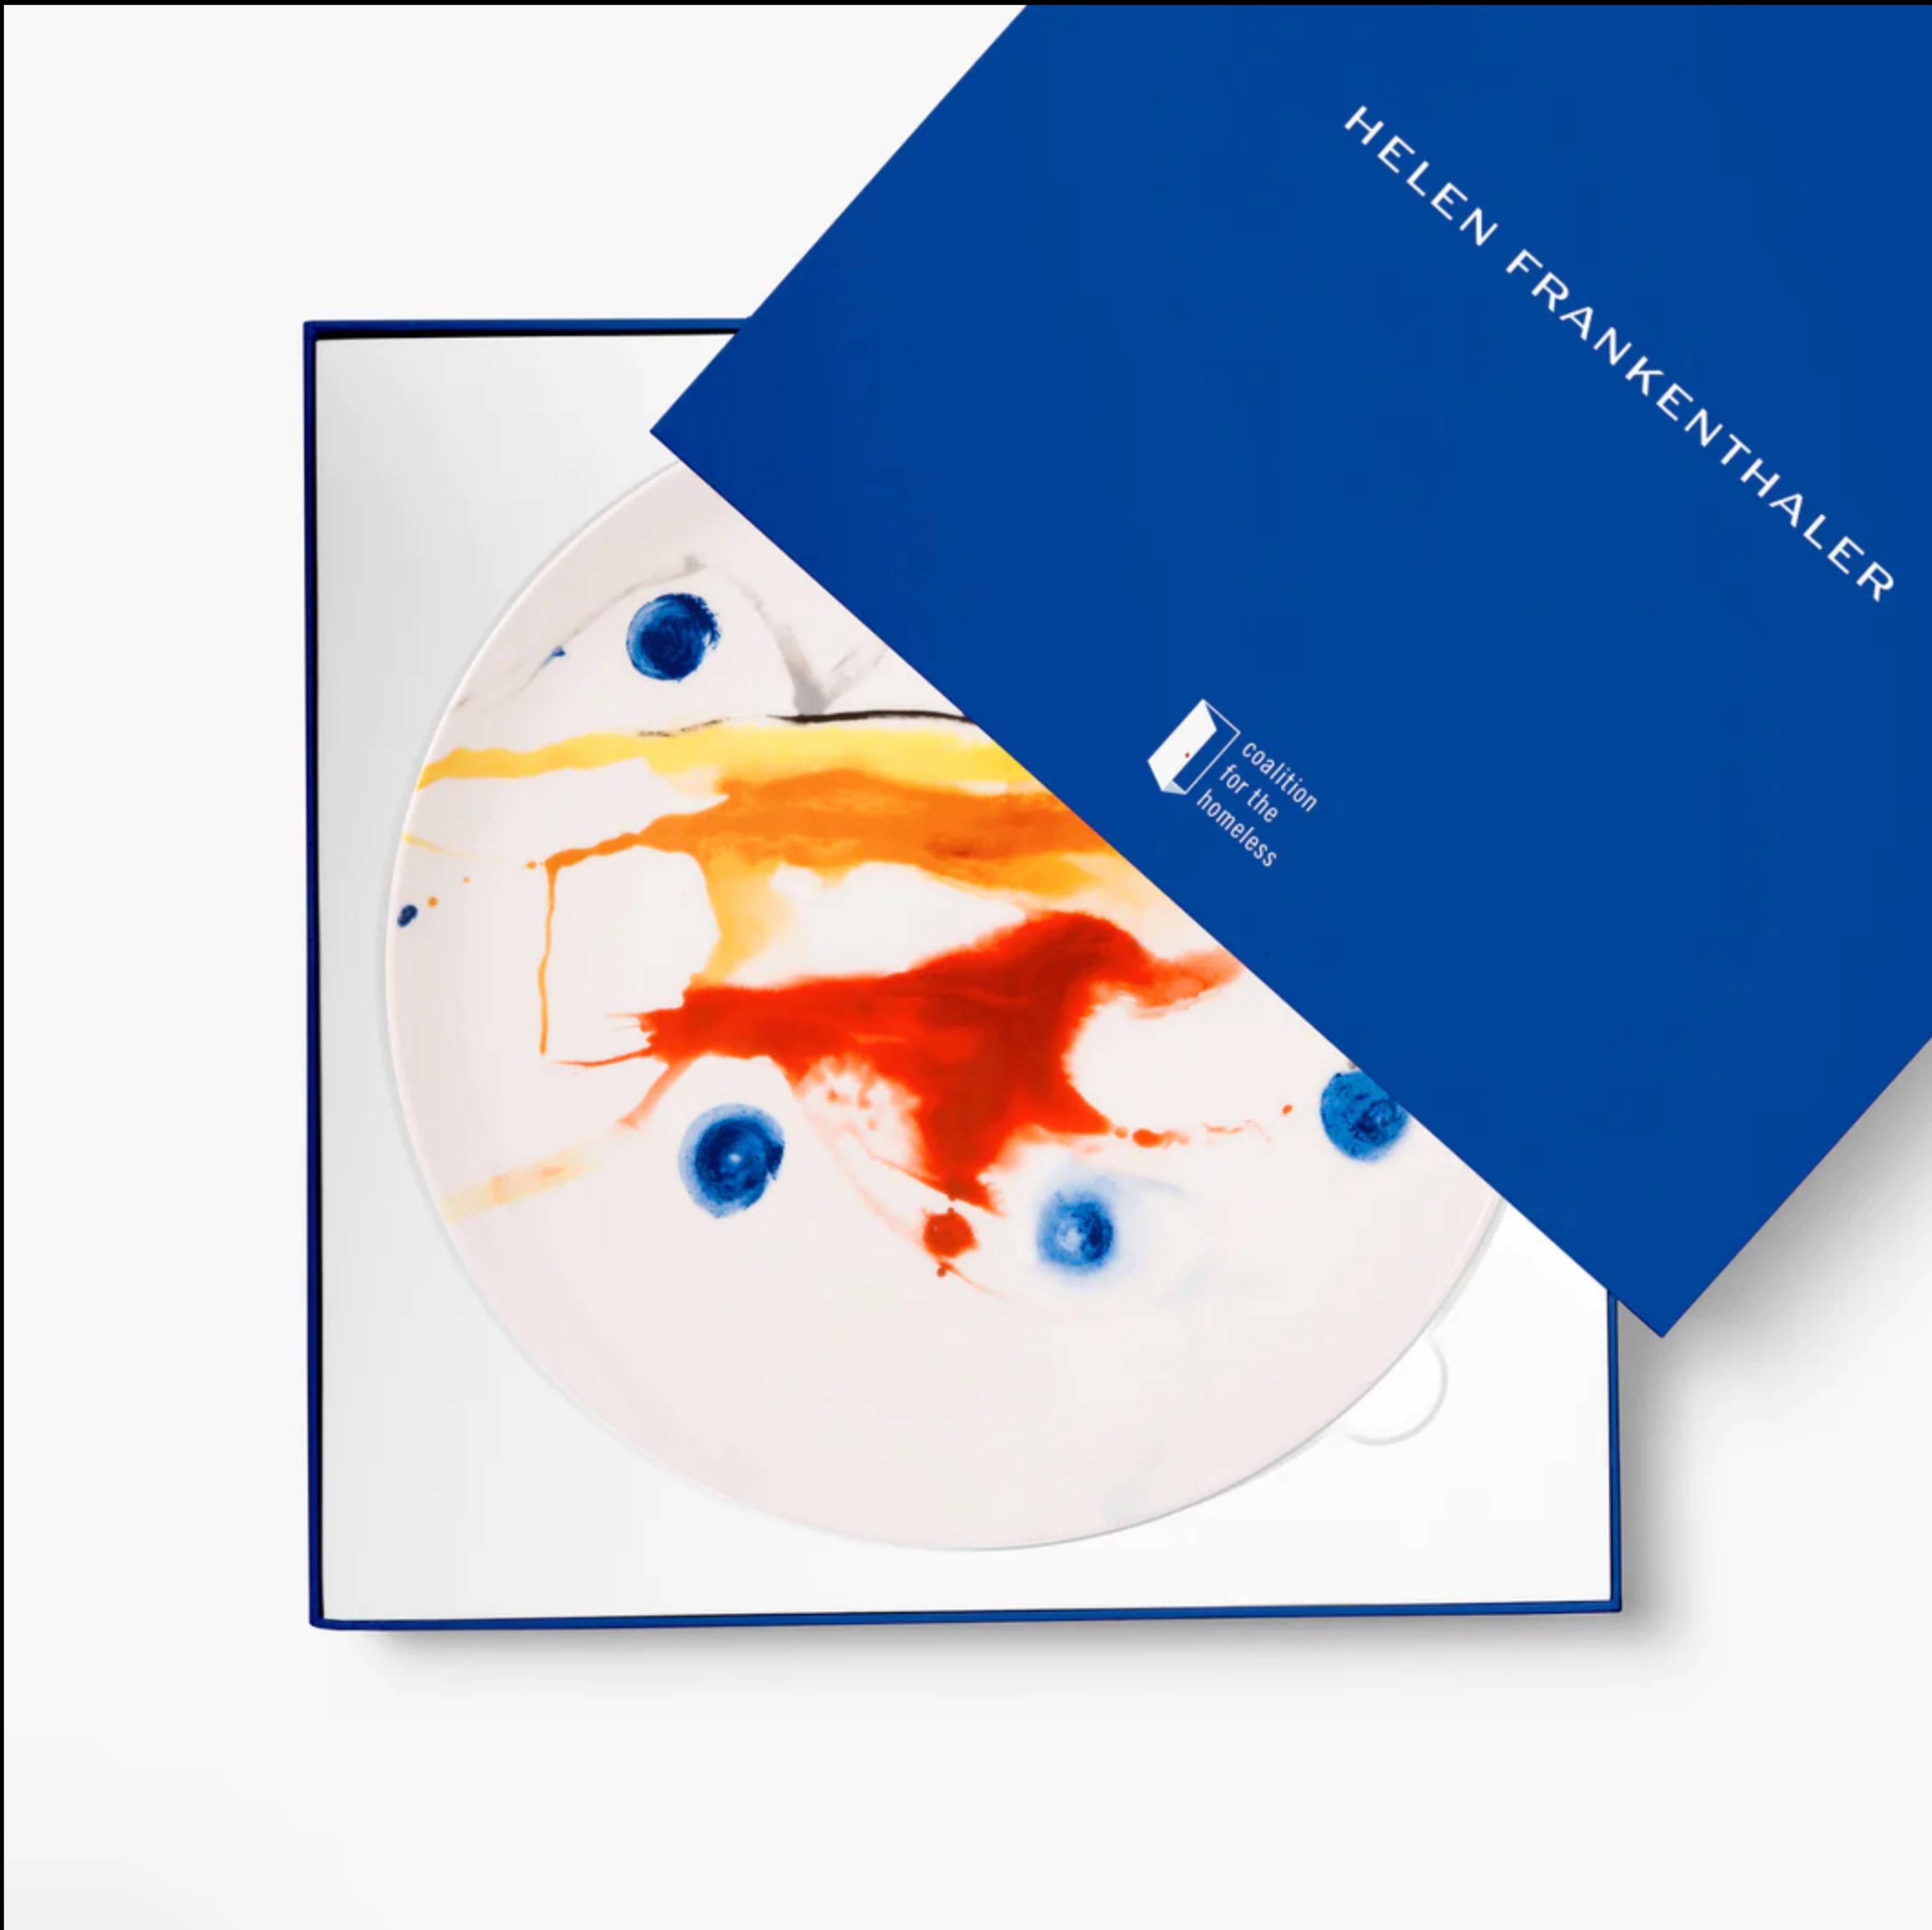 Acrobat (detail), Limited Edition Porcelain Plate in bespoke blue box - Abstract - Print by Helen Frankenthaler